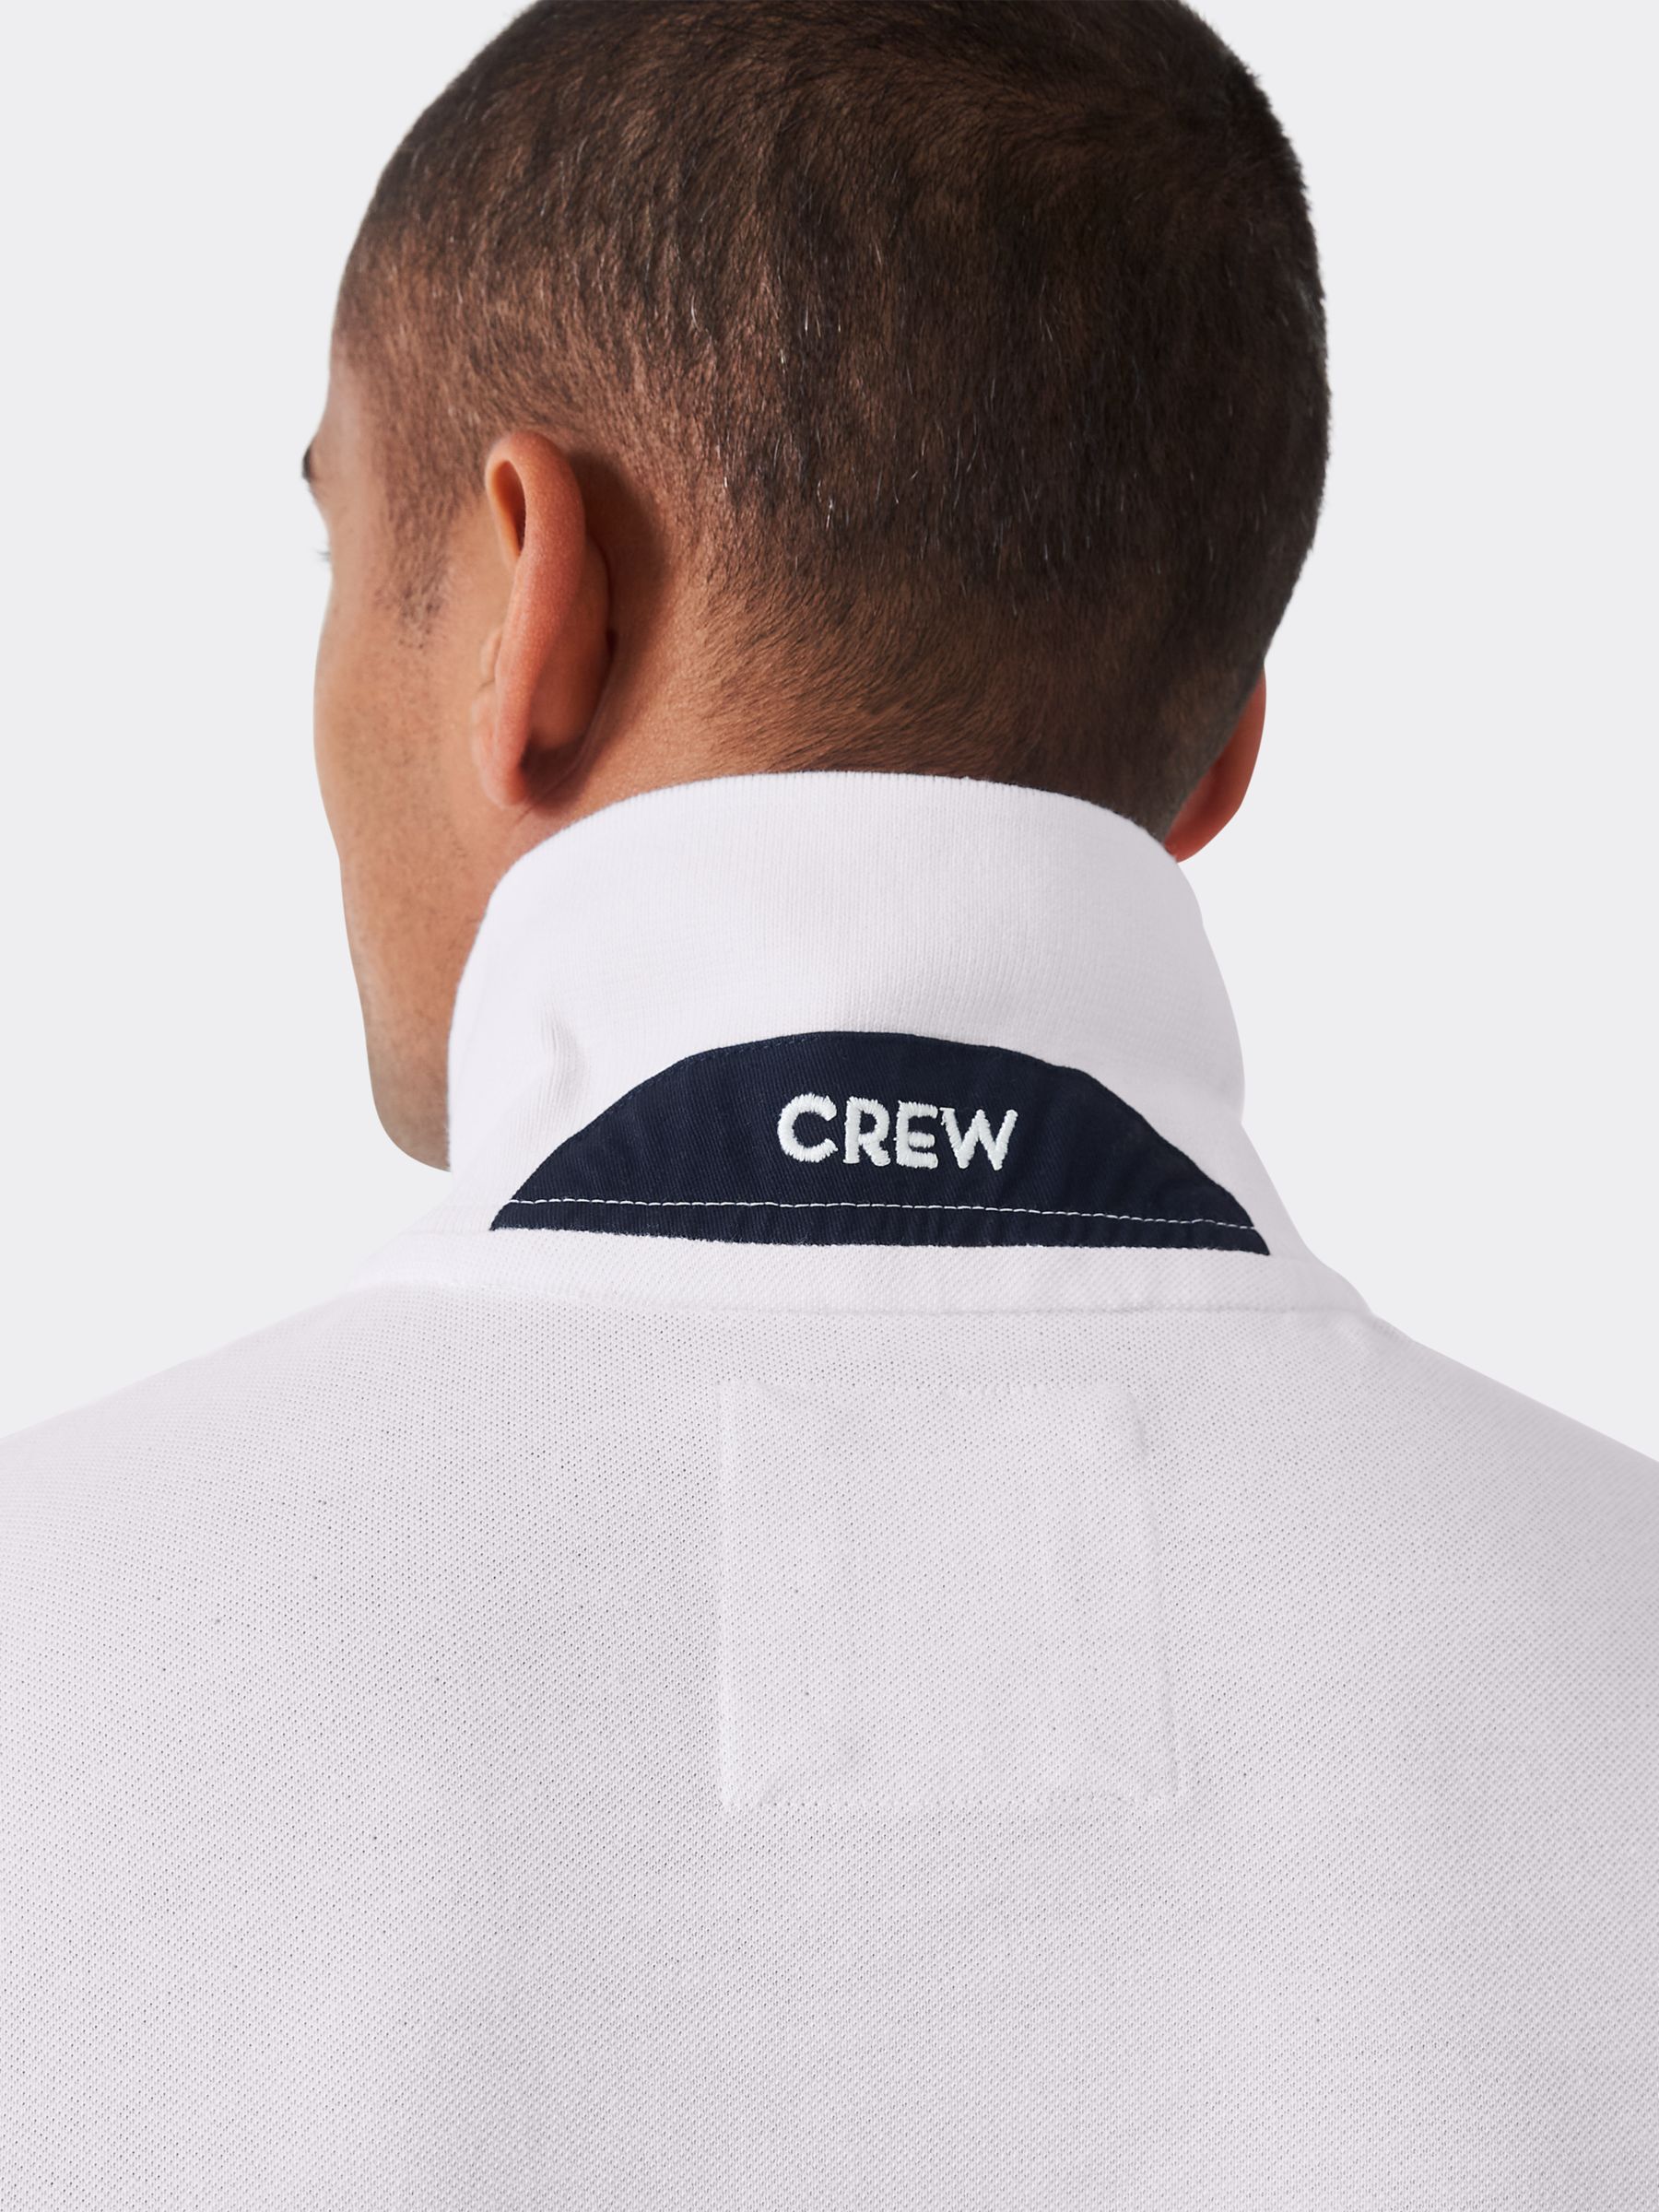 Crew Clothing Classic Pique Polo Shirt, White at John Lewis & Partners